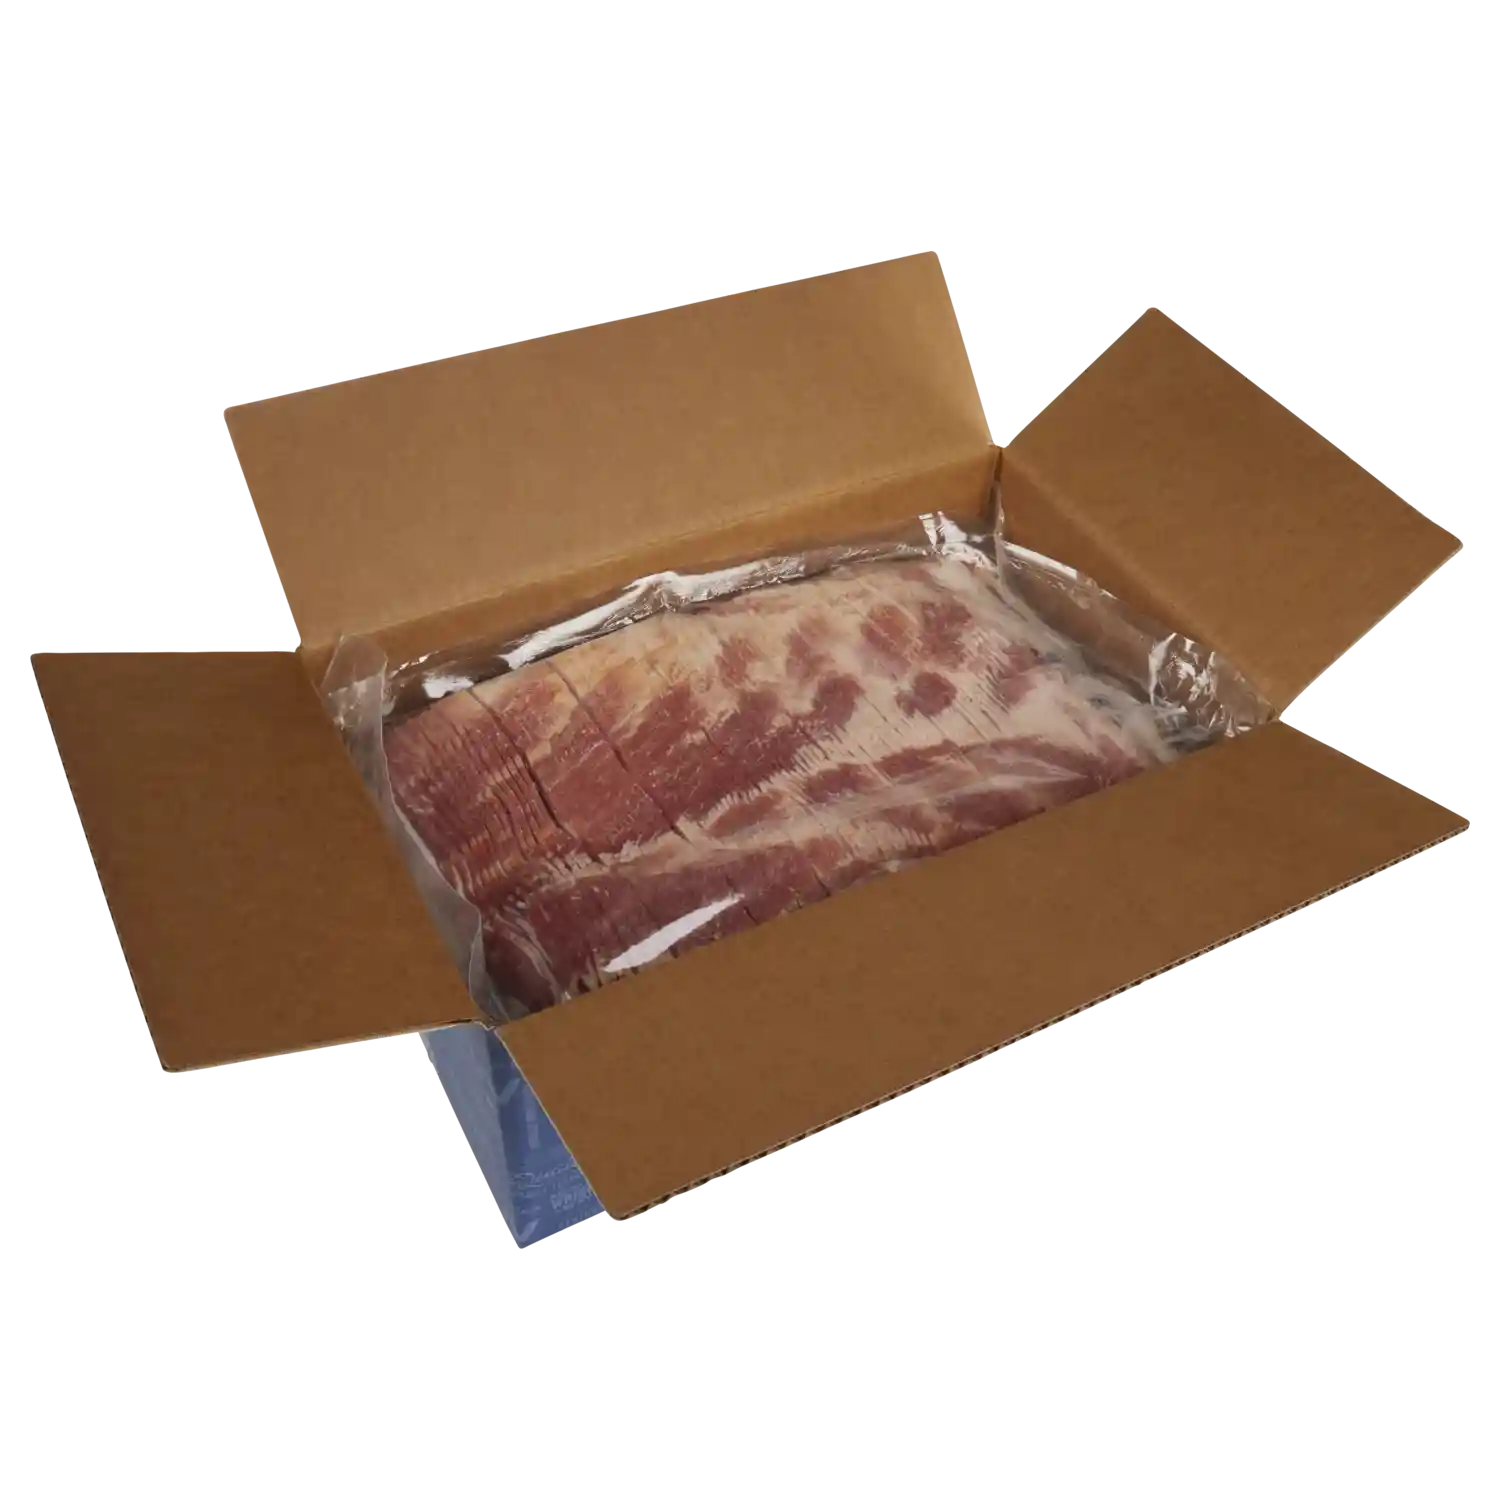 Wright® Brand Naturally Hickory Smoked Thin Sliced Bacon, Bulk, 30 Lbs, 18-22 Slices per Pound, Gas Flushed_image_31